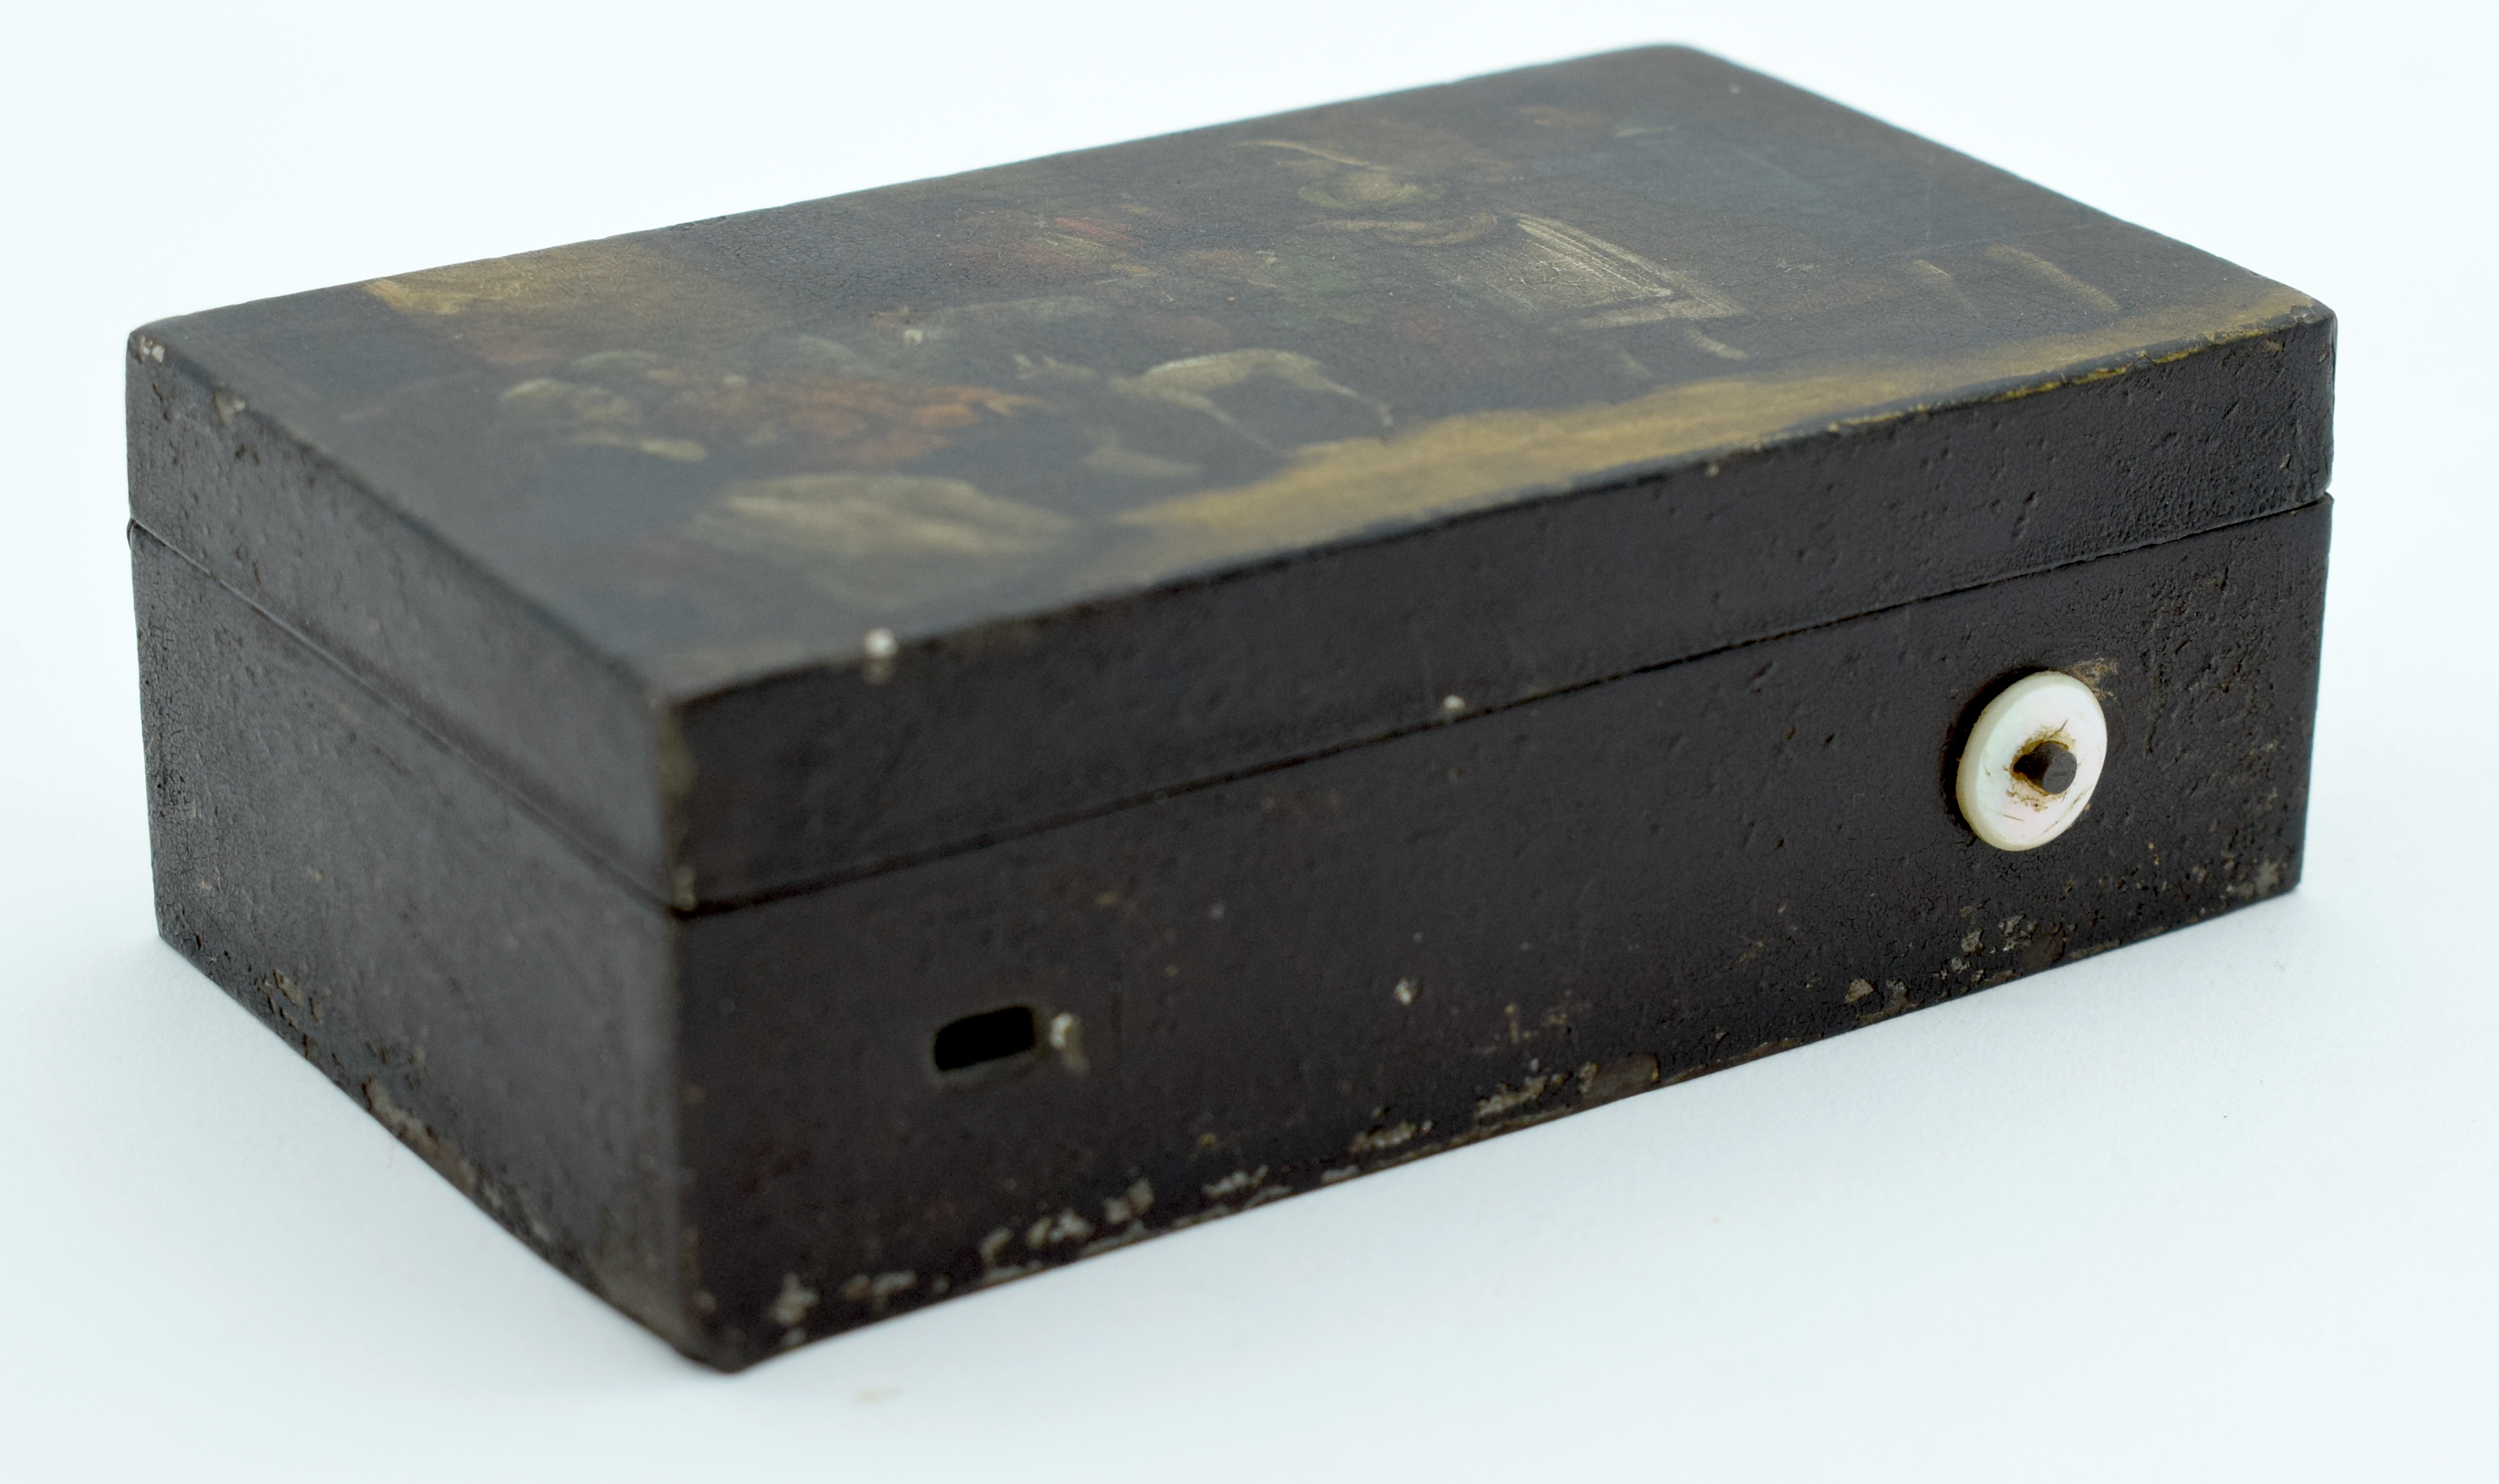 A RARE 19TH CENTURY PAINTED LACQUERED POCKET TIN MUSICAL BOX painted with figures within interiors i